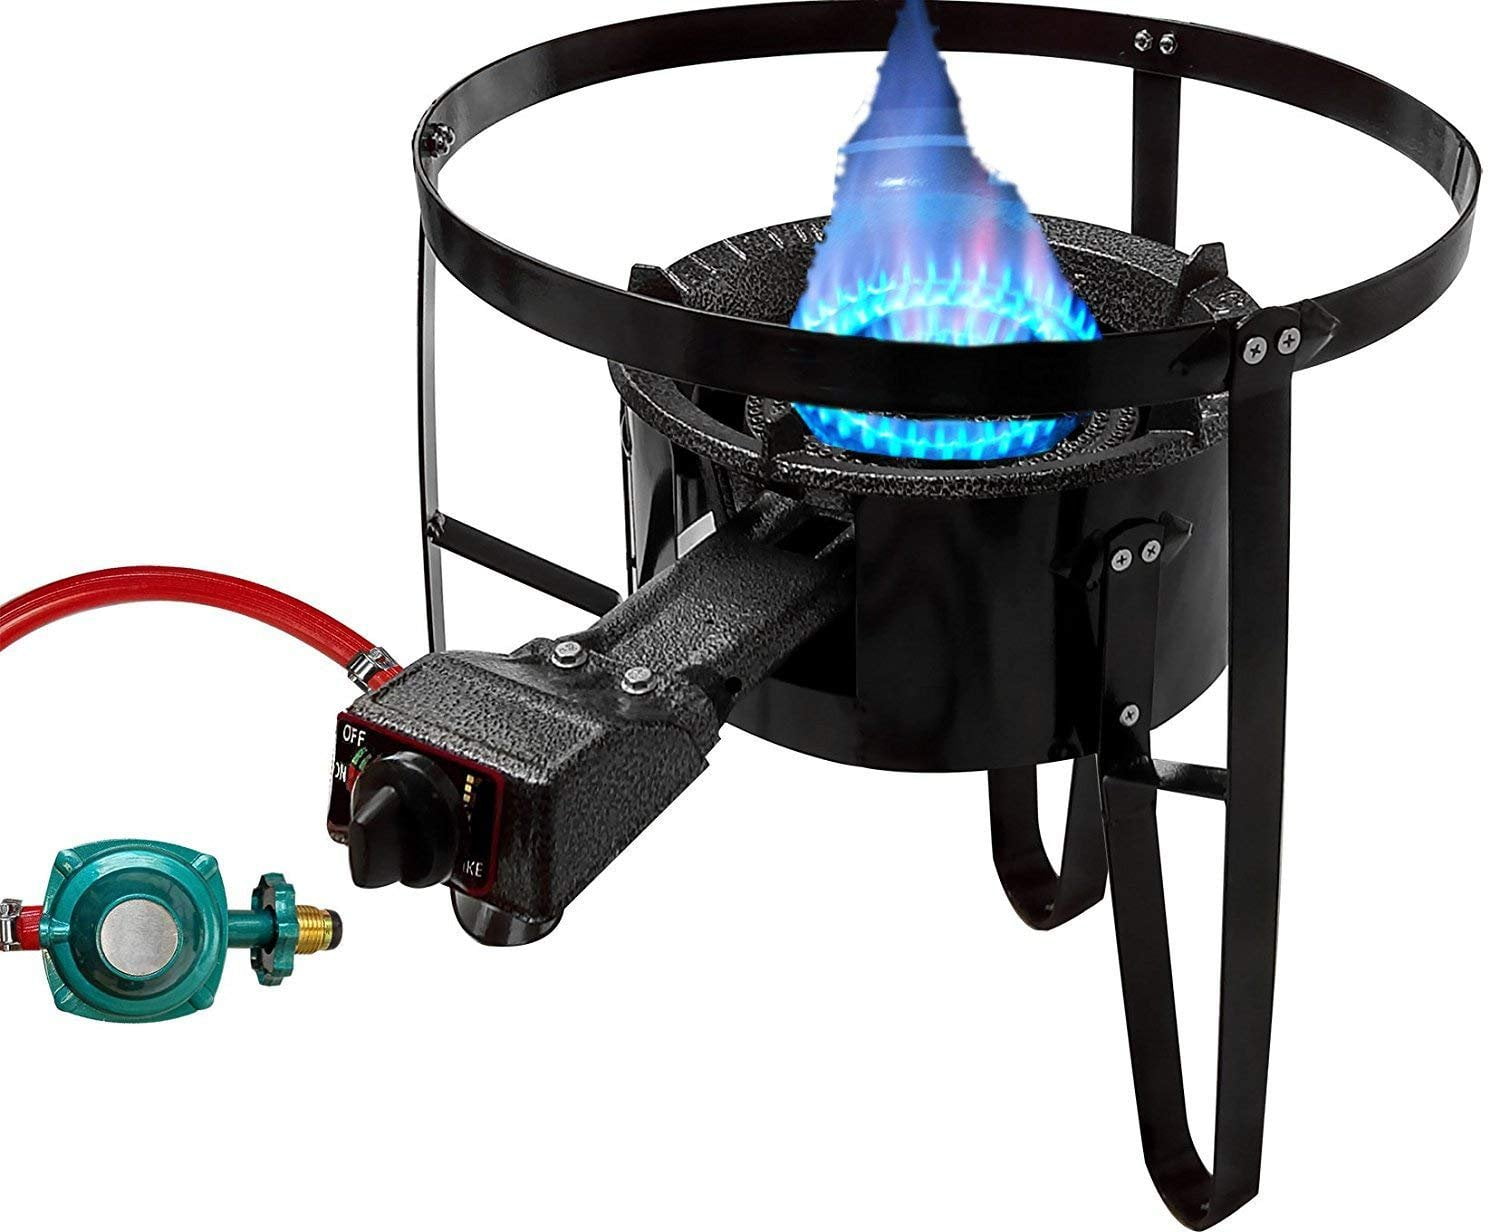 Gas propane burner sets connectors and regulator available All sizes. Burners 